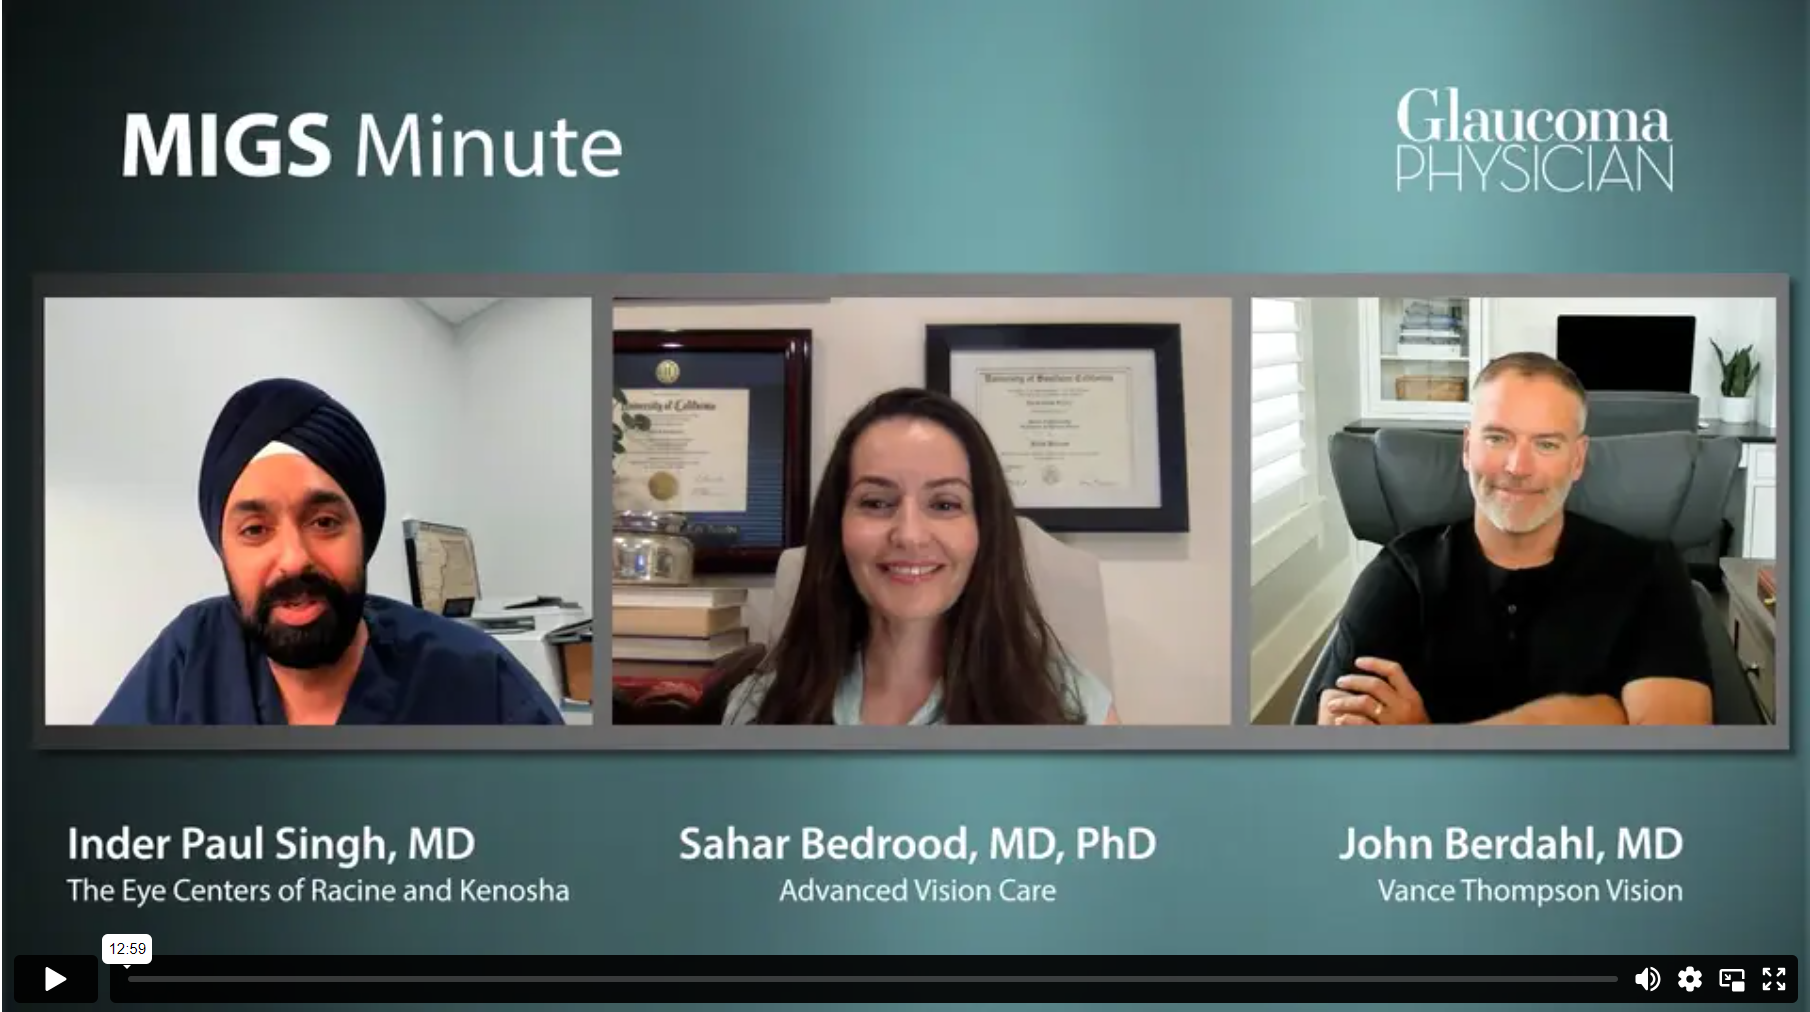 Episode 6: Inder Paul Singh, MD, Sahar Bedrood, MD, PhD, and John Berdahl, MD discuss the iStent Infinite.